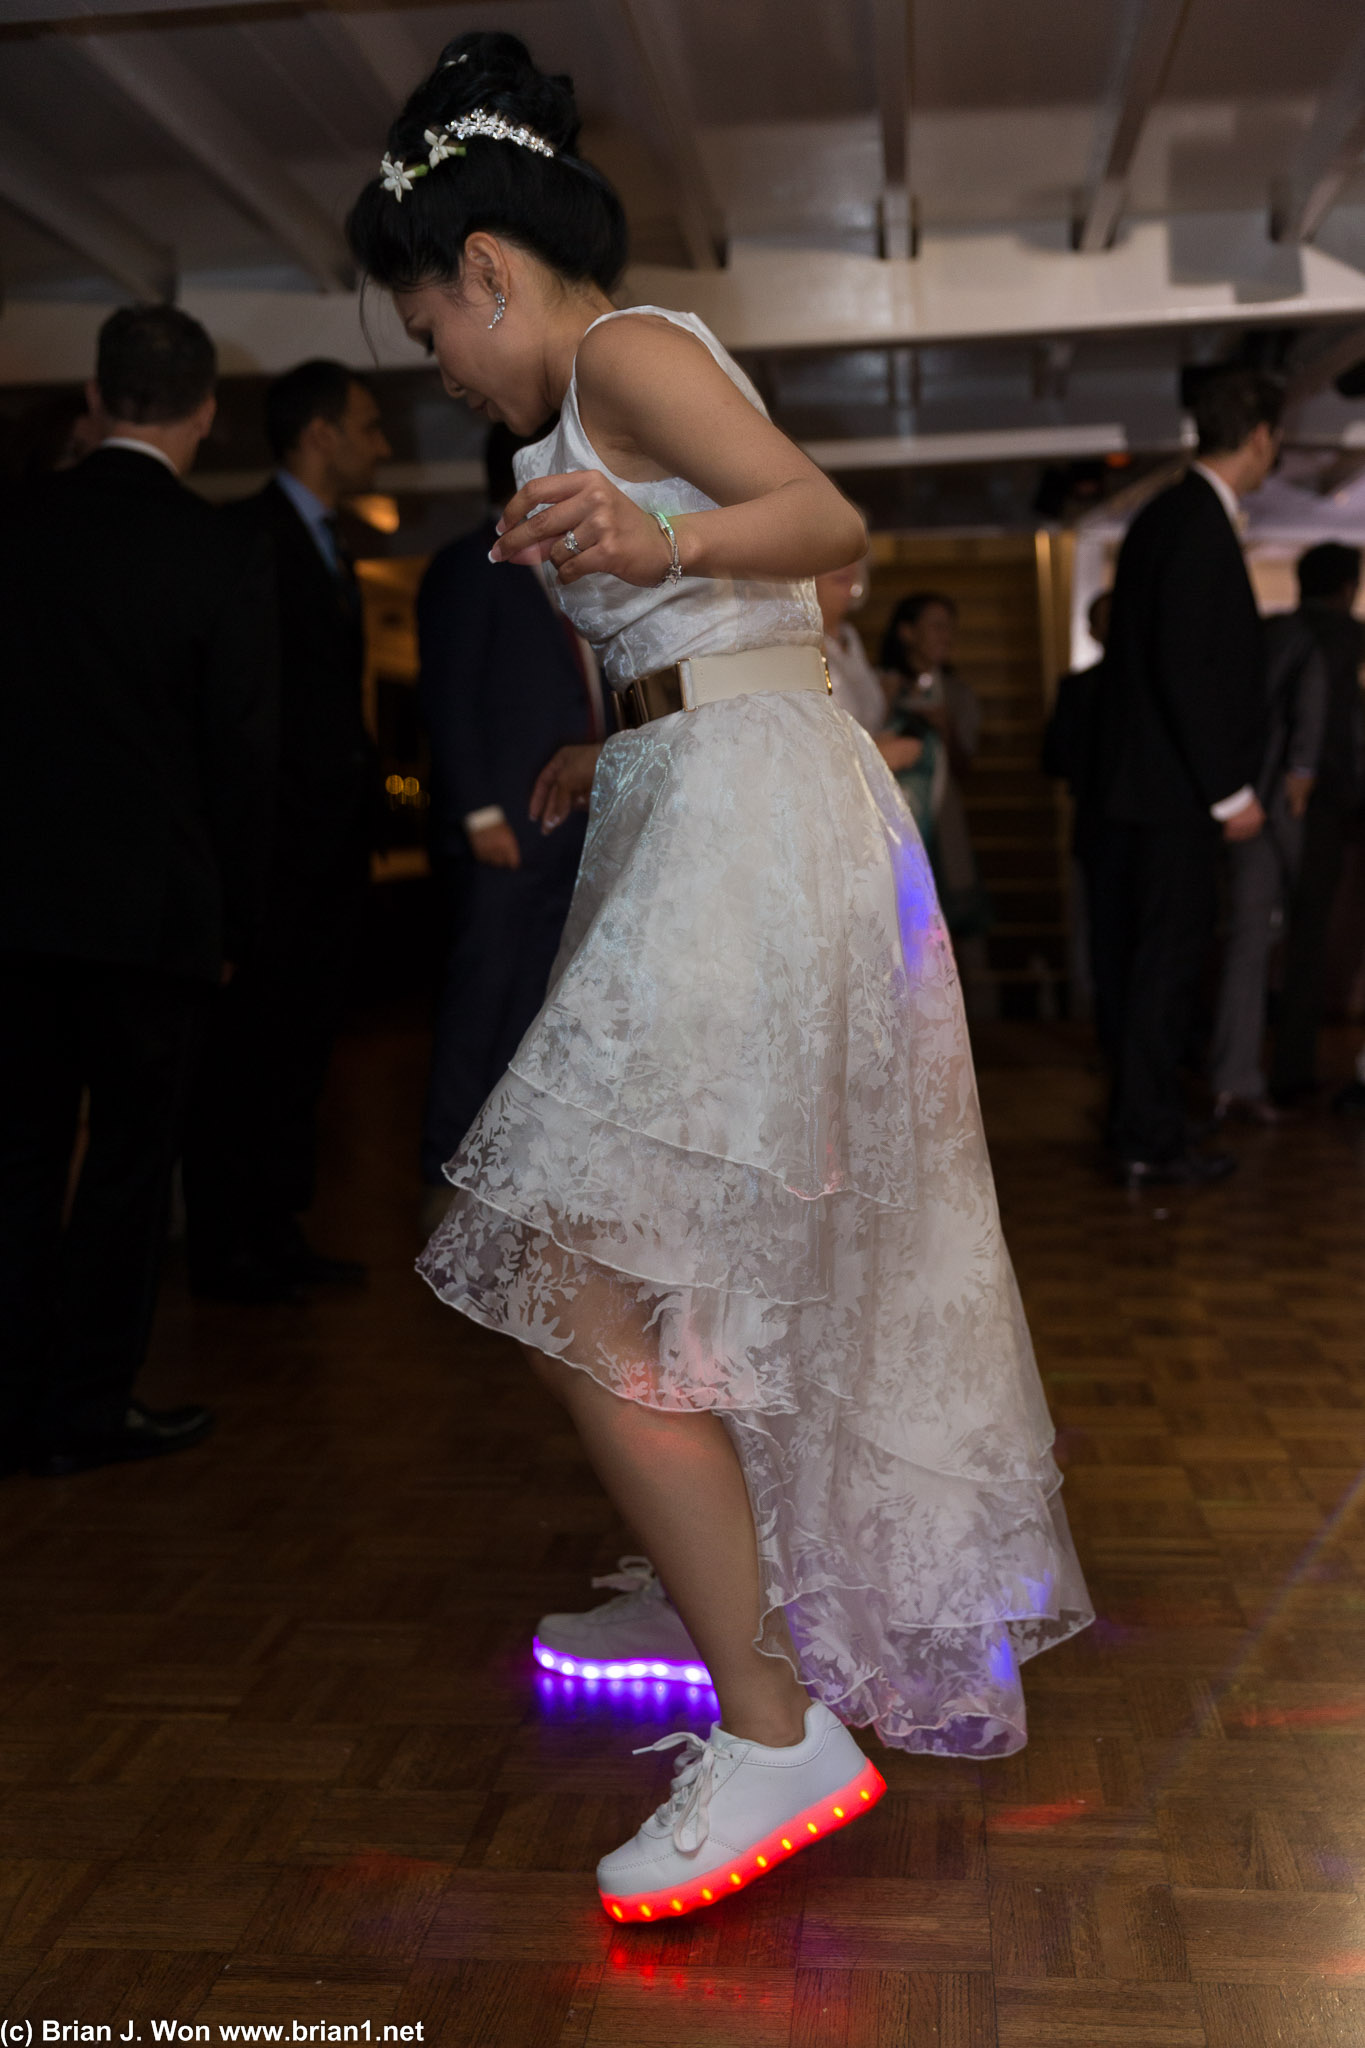 Light-up dancing shoes.